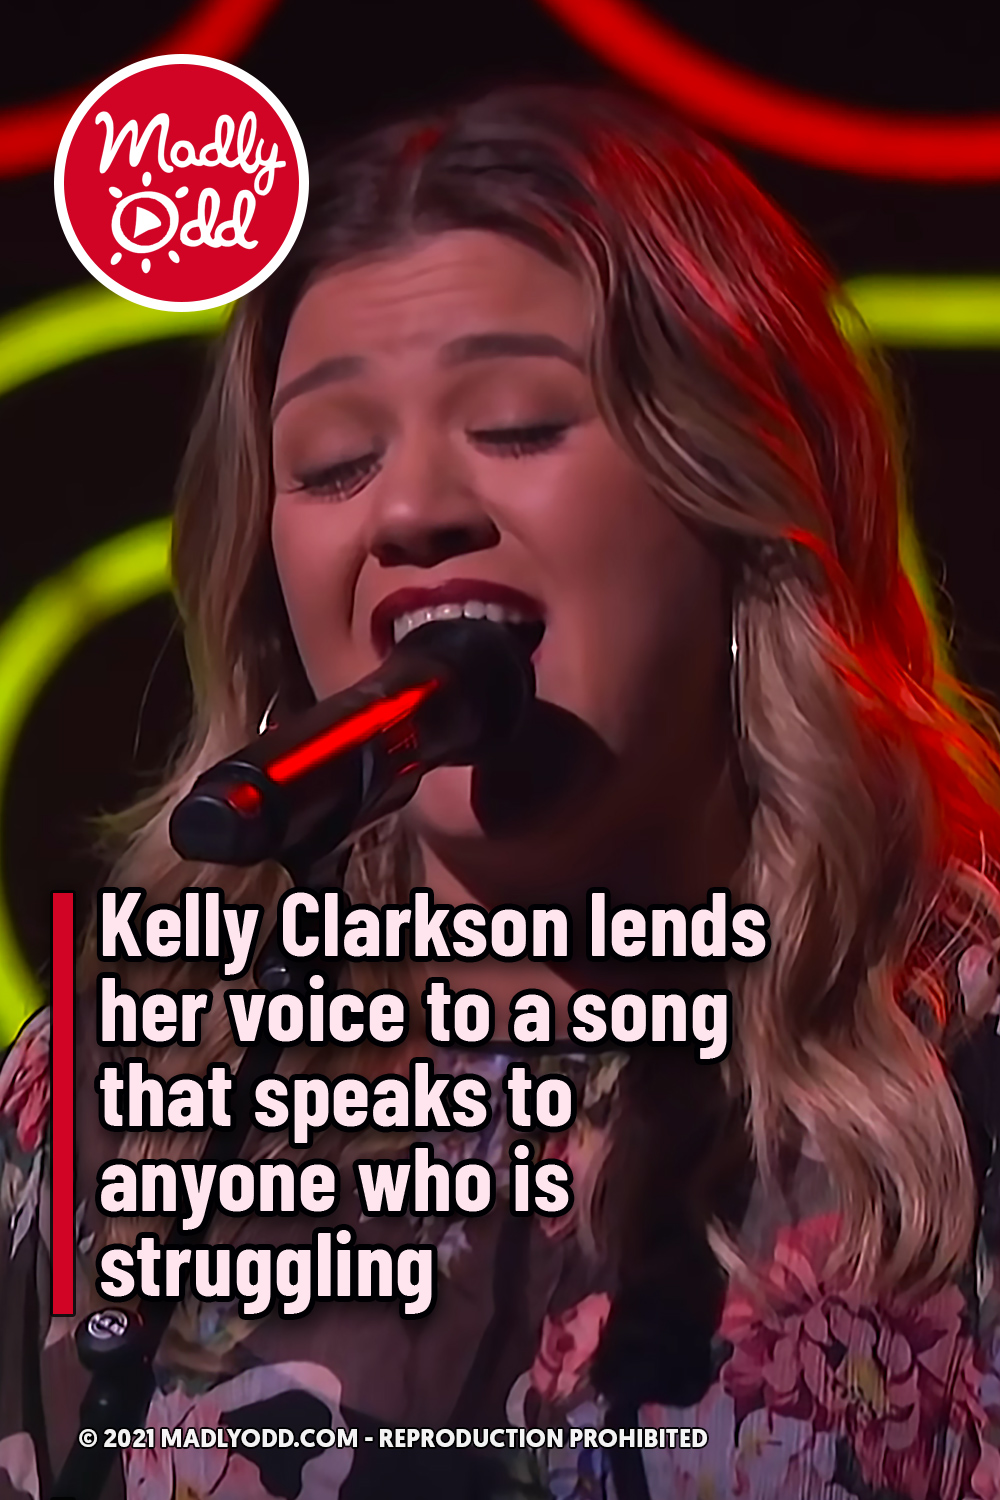 Kelly Clarkson lends her voice to a song that speaks to anyone who is struggling